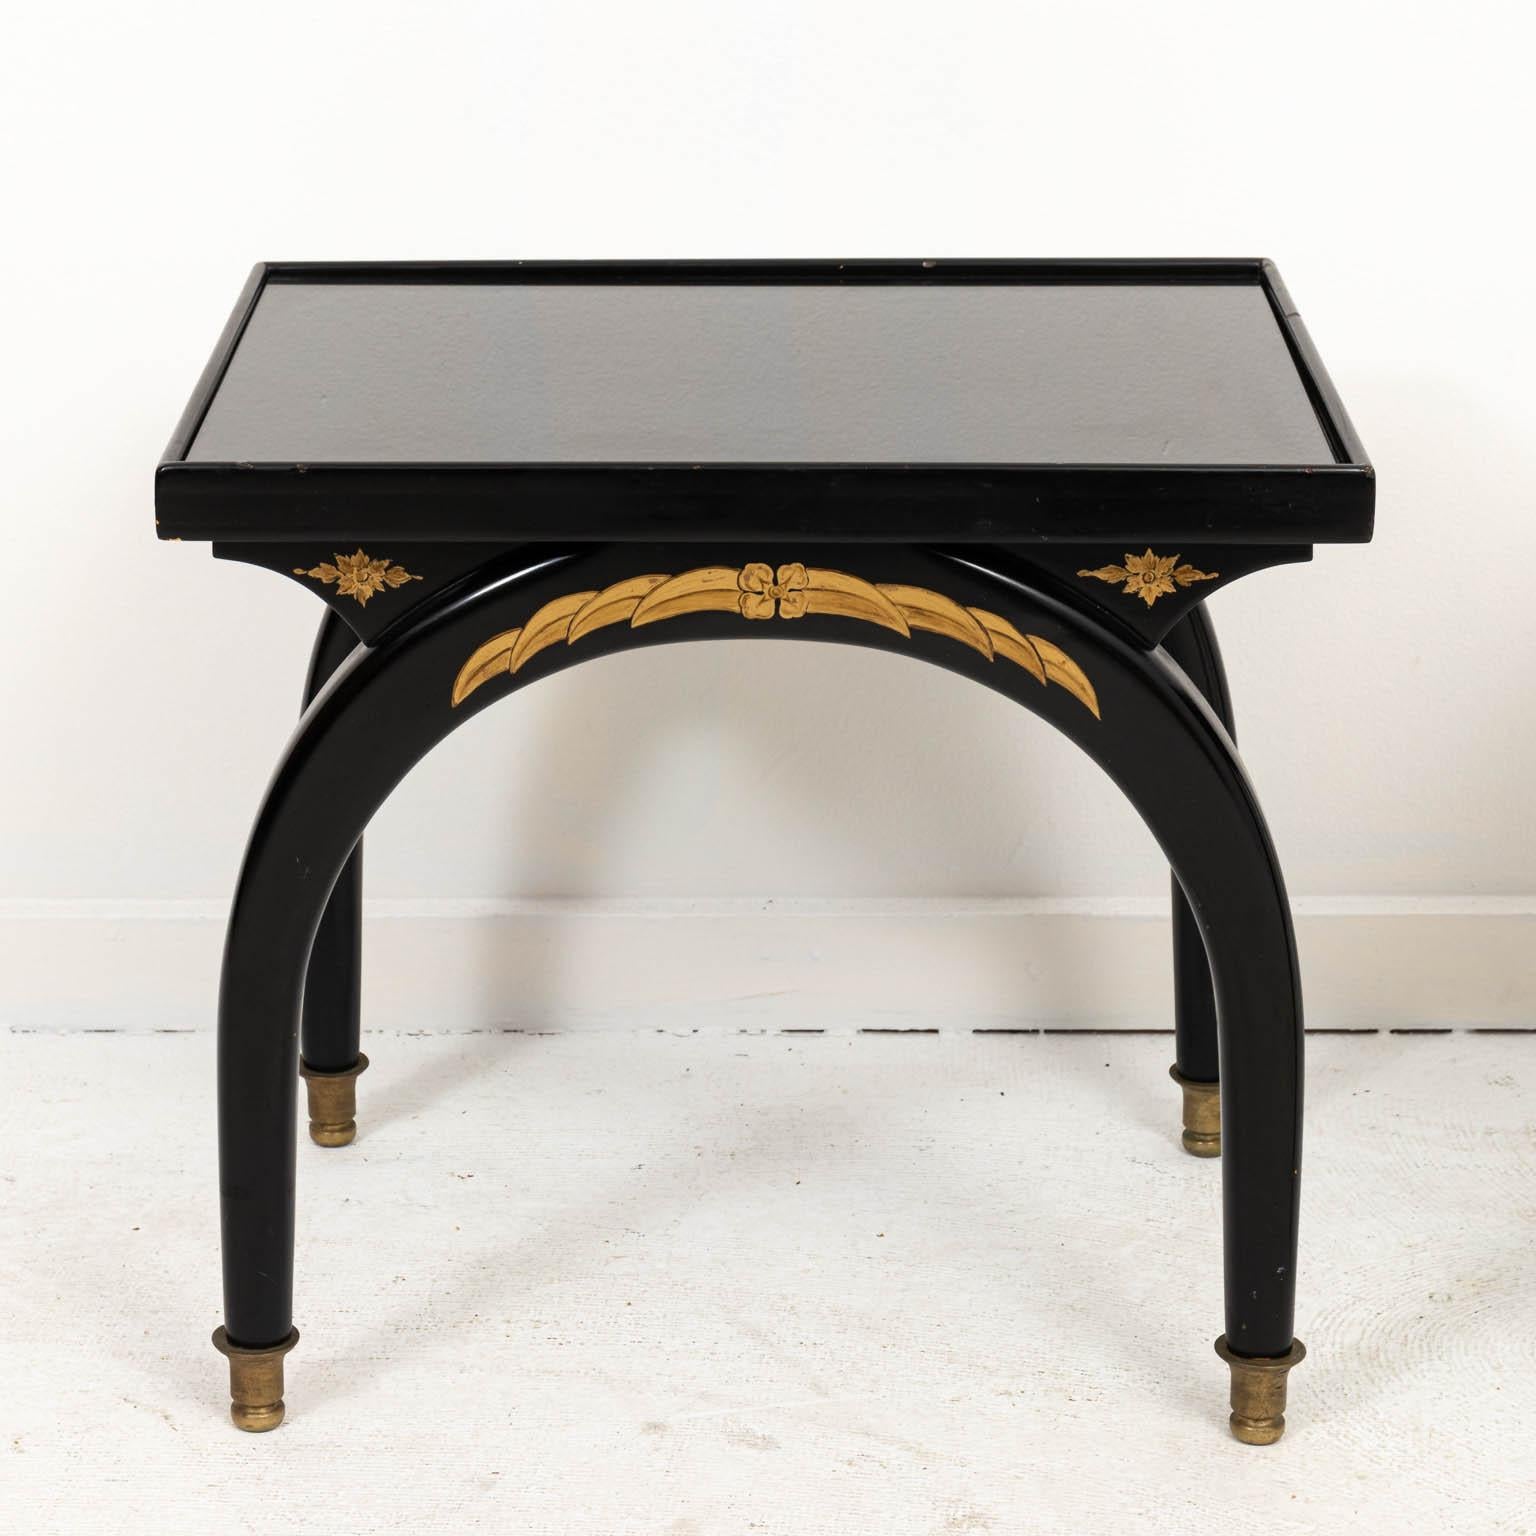 Italian Pair of Art Deco Style Black Rectangular Side Tables with Glass Top